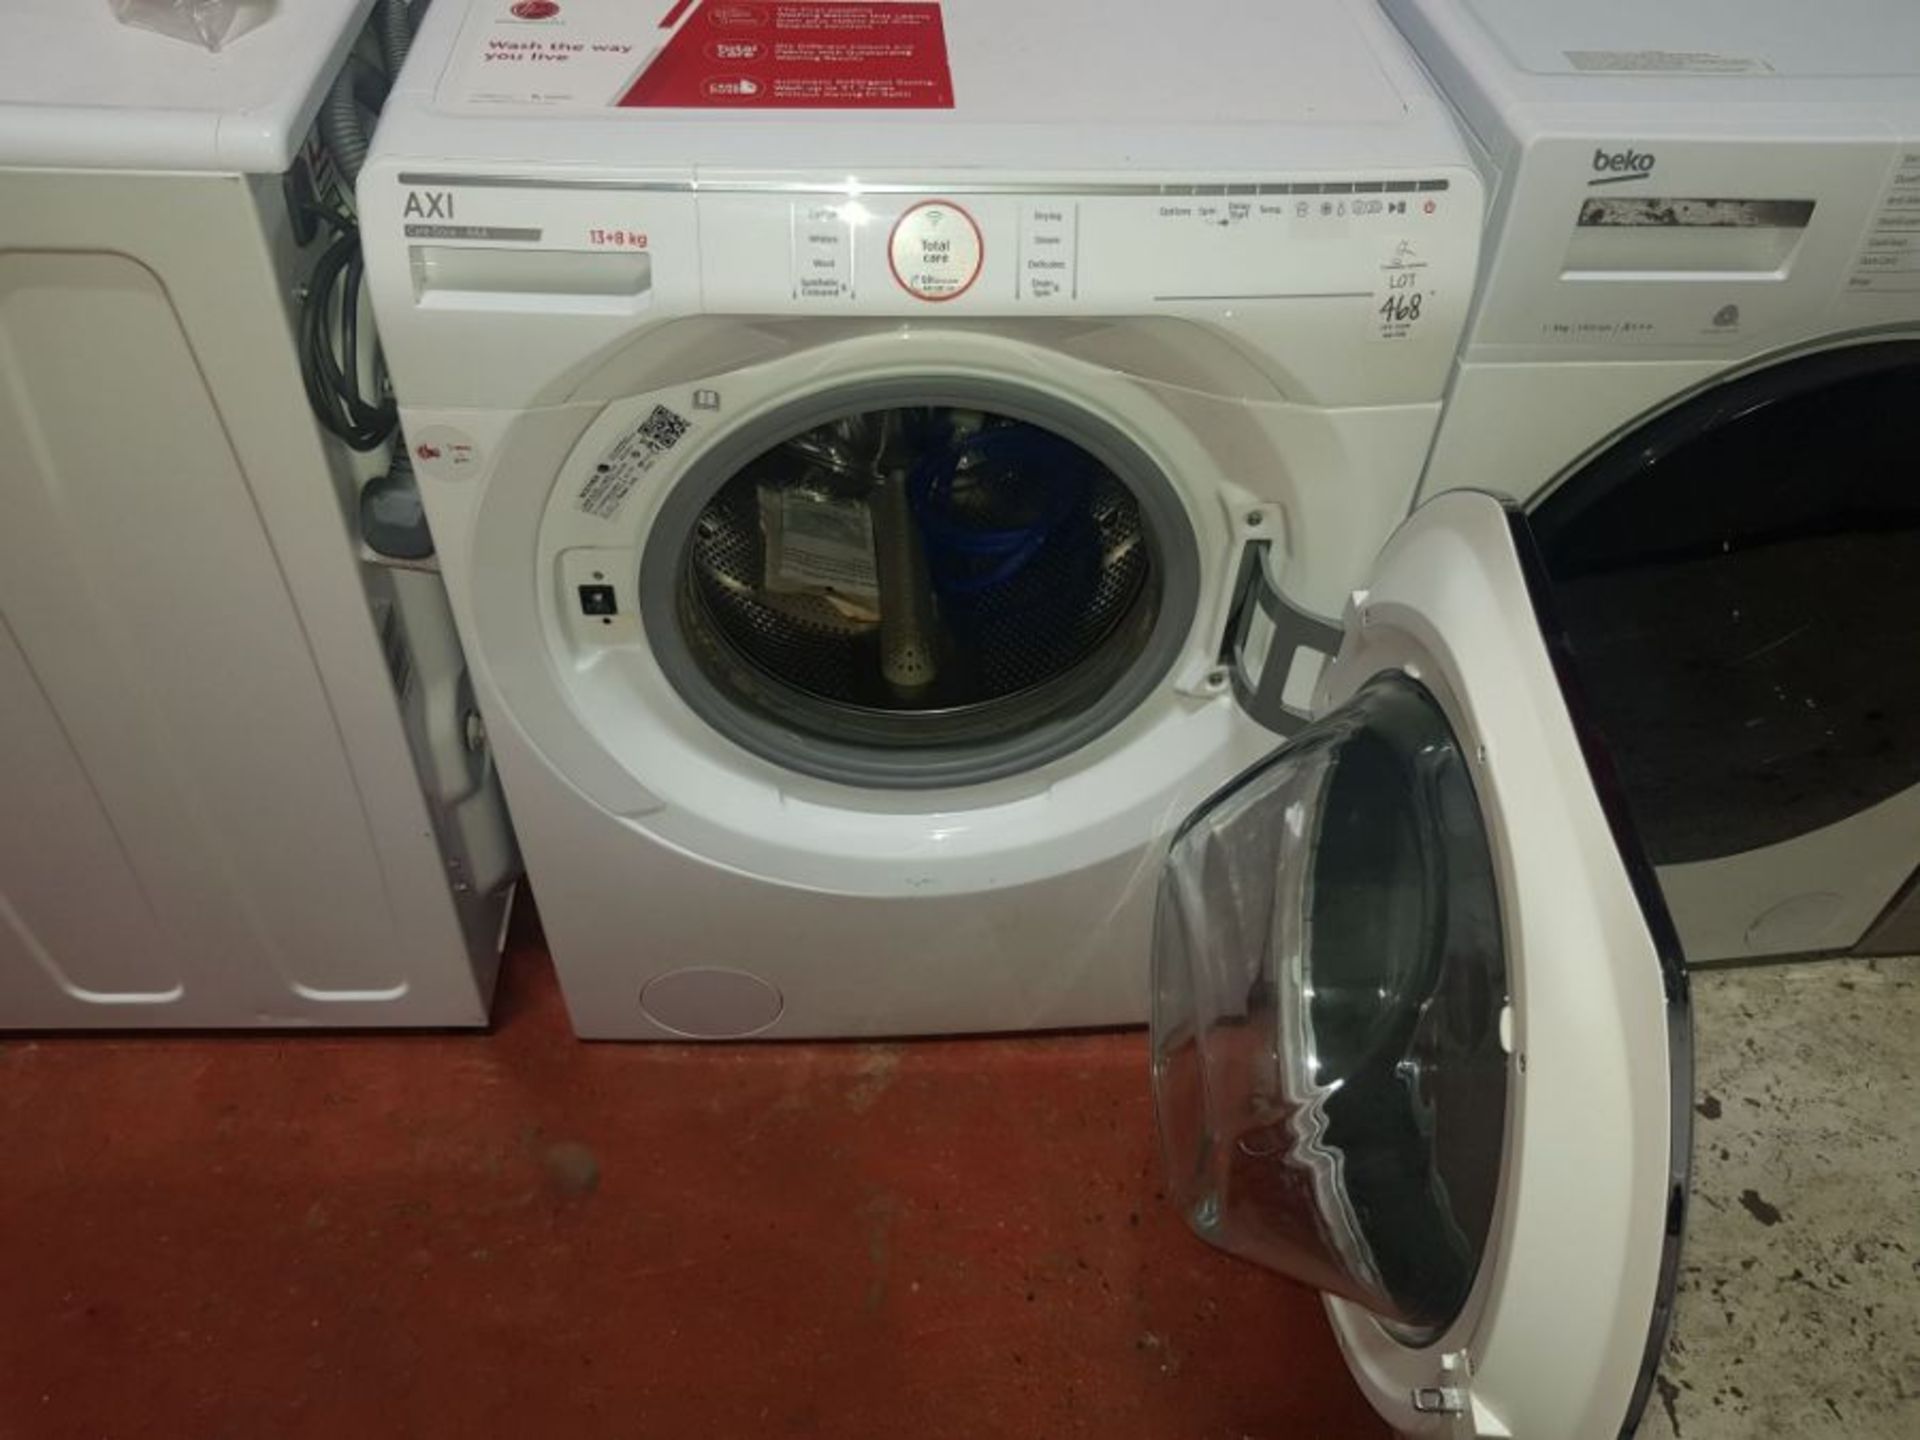 HOOVER AWDPD4148LH1-80 WASHING DRYER MACHINE 13+8KG (VAT TO BE ADDED TO HAMMER PRICE) - Image 3 of 4